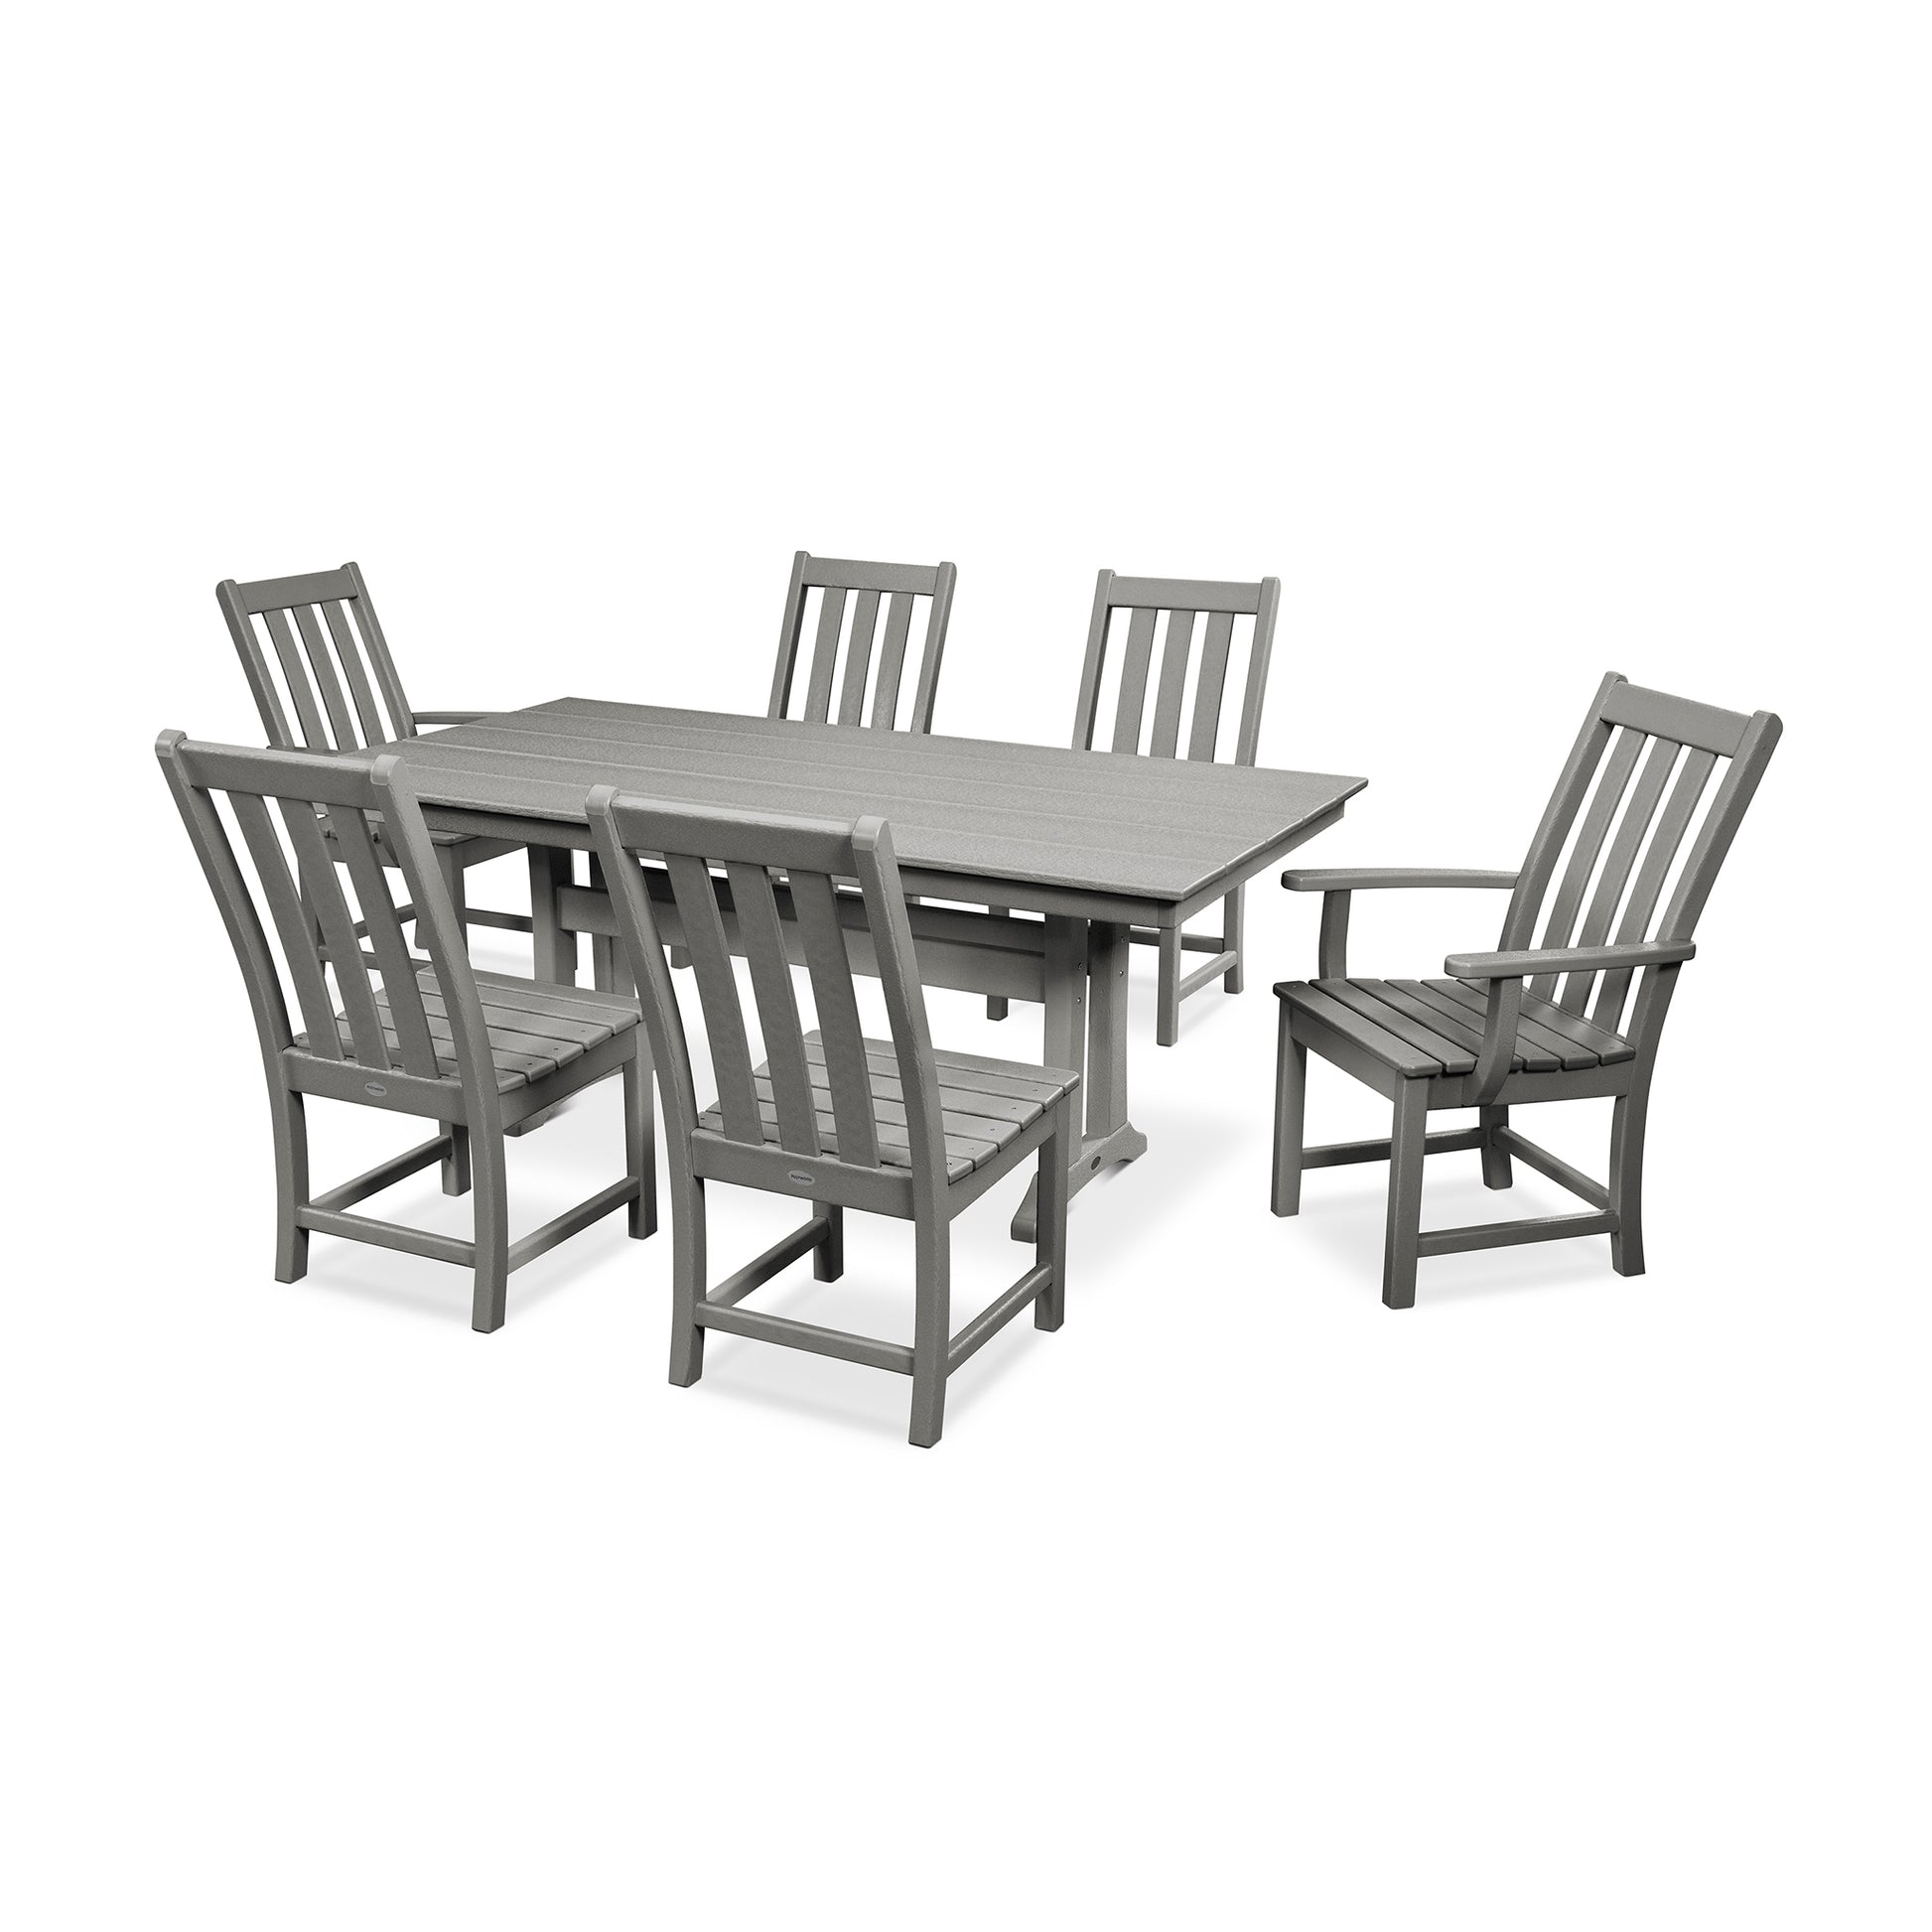 A modern outdoor dining set consisting of a POLYWOOD Vineyard 7-Piece Farmhouse Trestle Dining Set, which includes a large farmhouse trestle table and six matching chairs, all made of gray synthetic material, arranged on a white background.